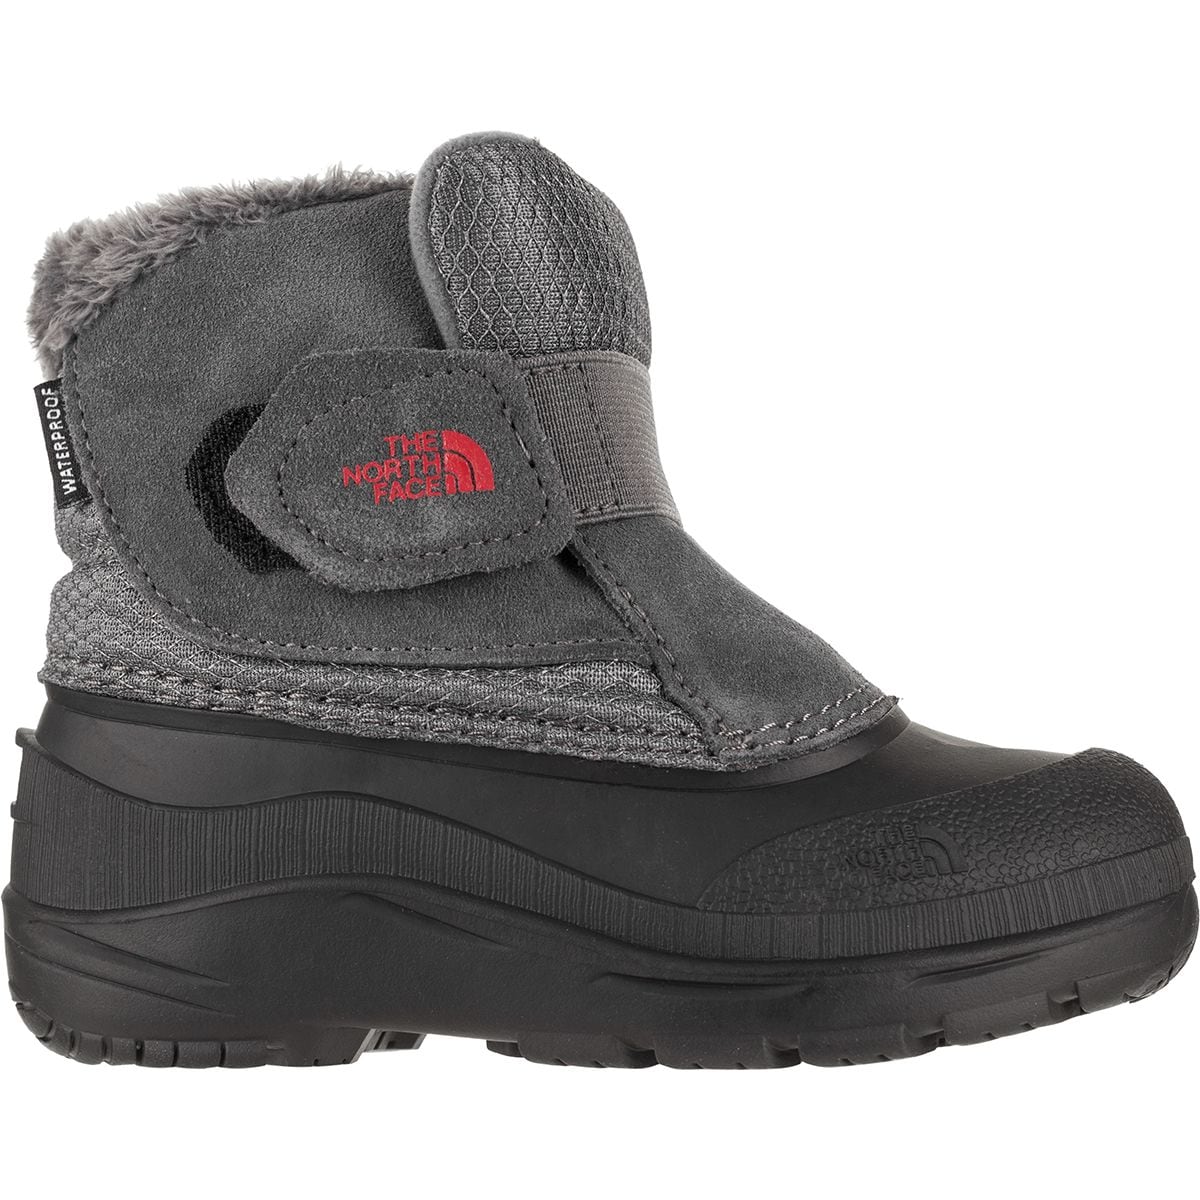 The North Face Alpenglow II Boot - Toddler Boys'